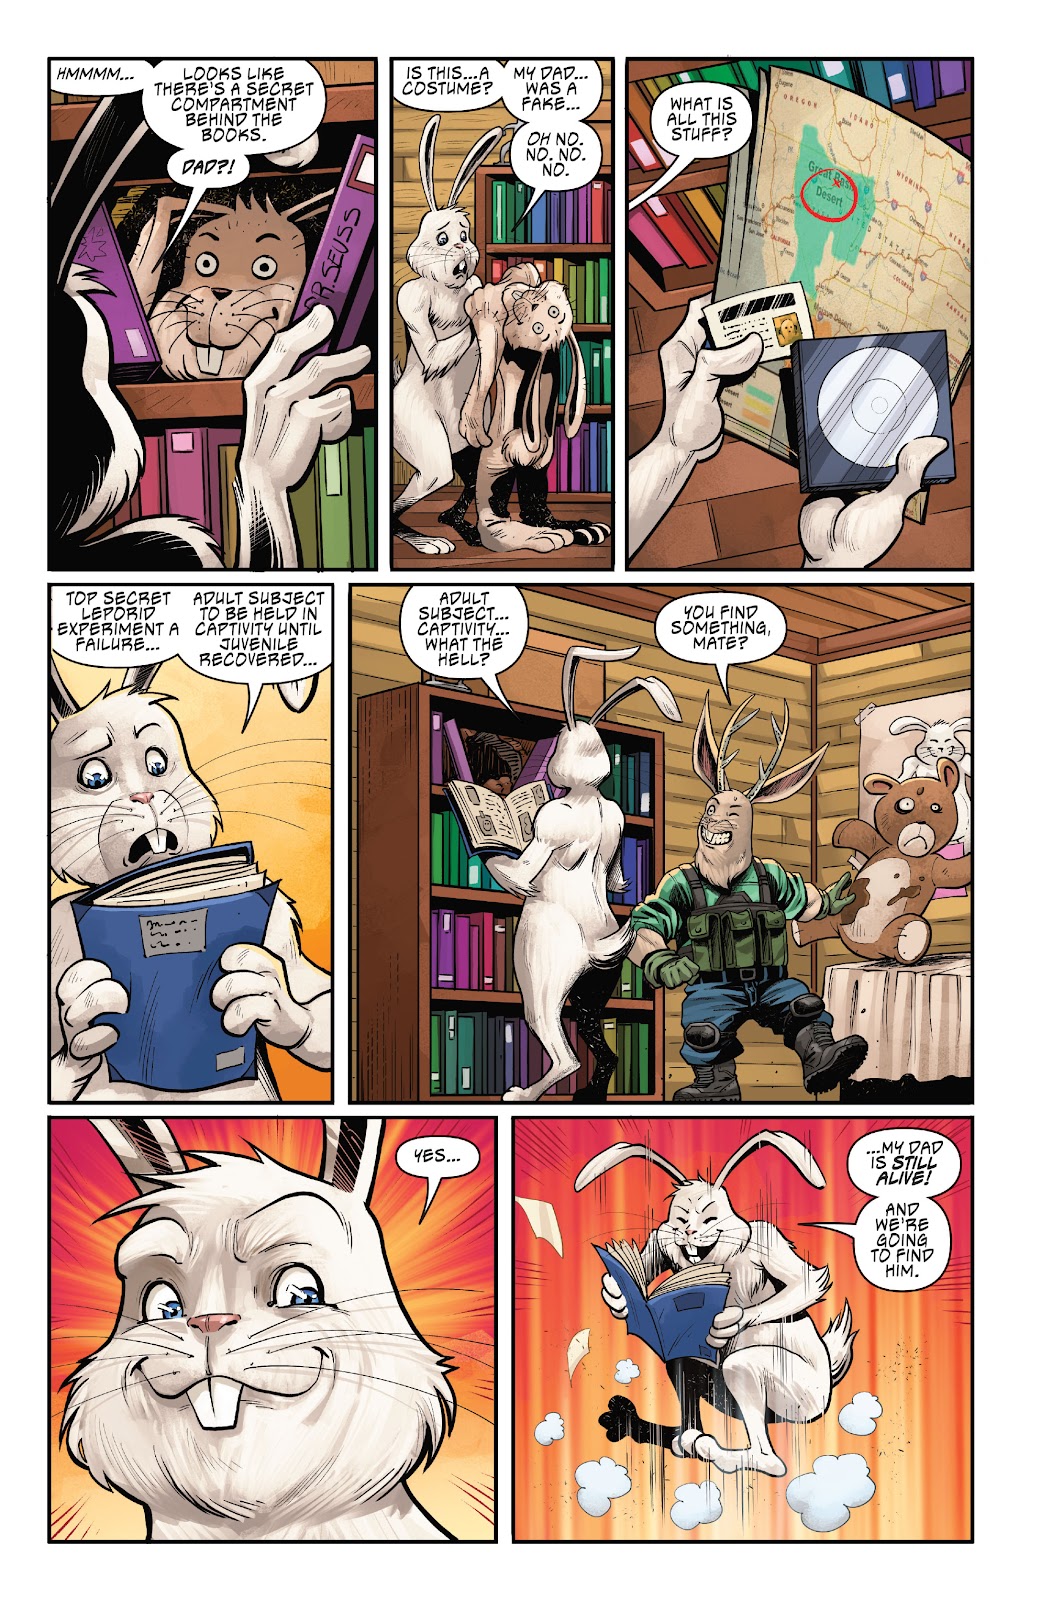 Man Goat & the Bunnyman: Green Eggs & Blam issue 1 - Page 24